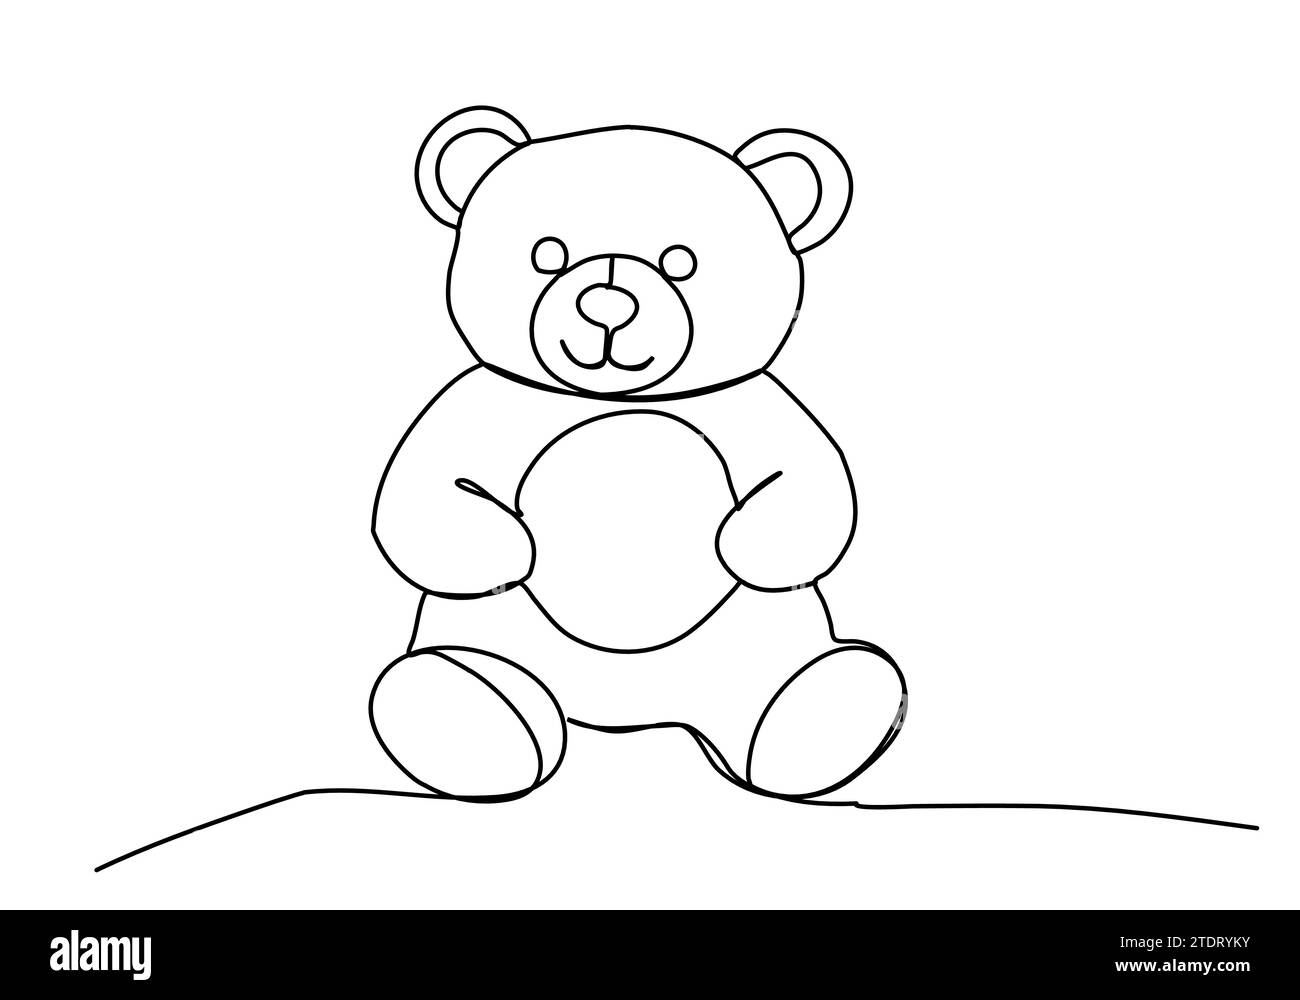 Toy bear, one line drawing vector illustration. Stock Vector